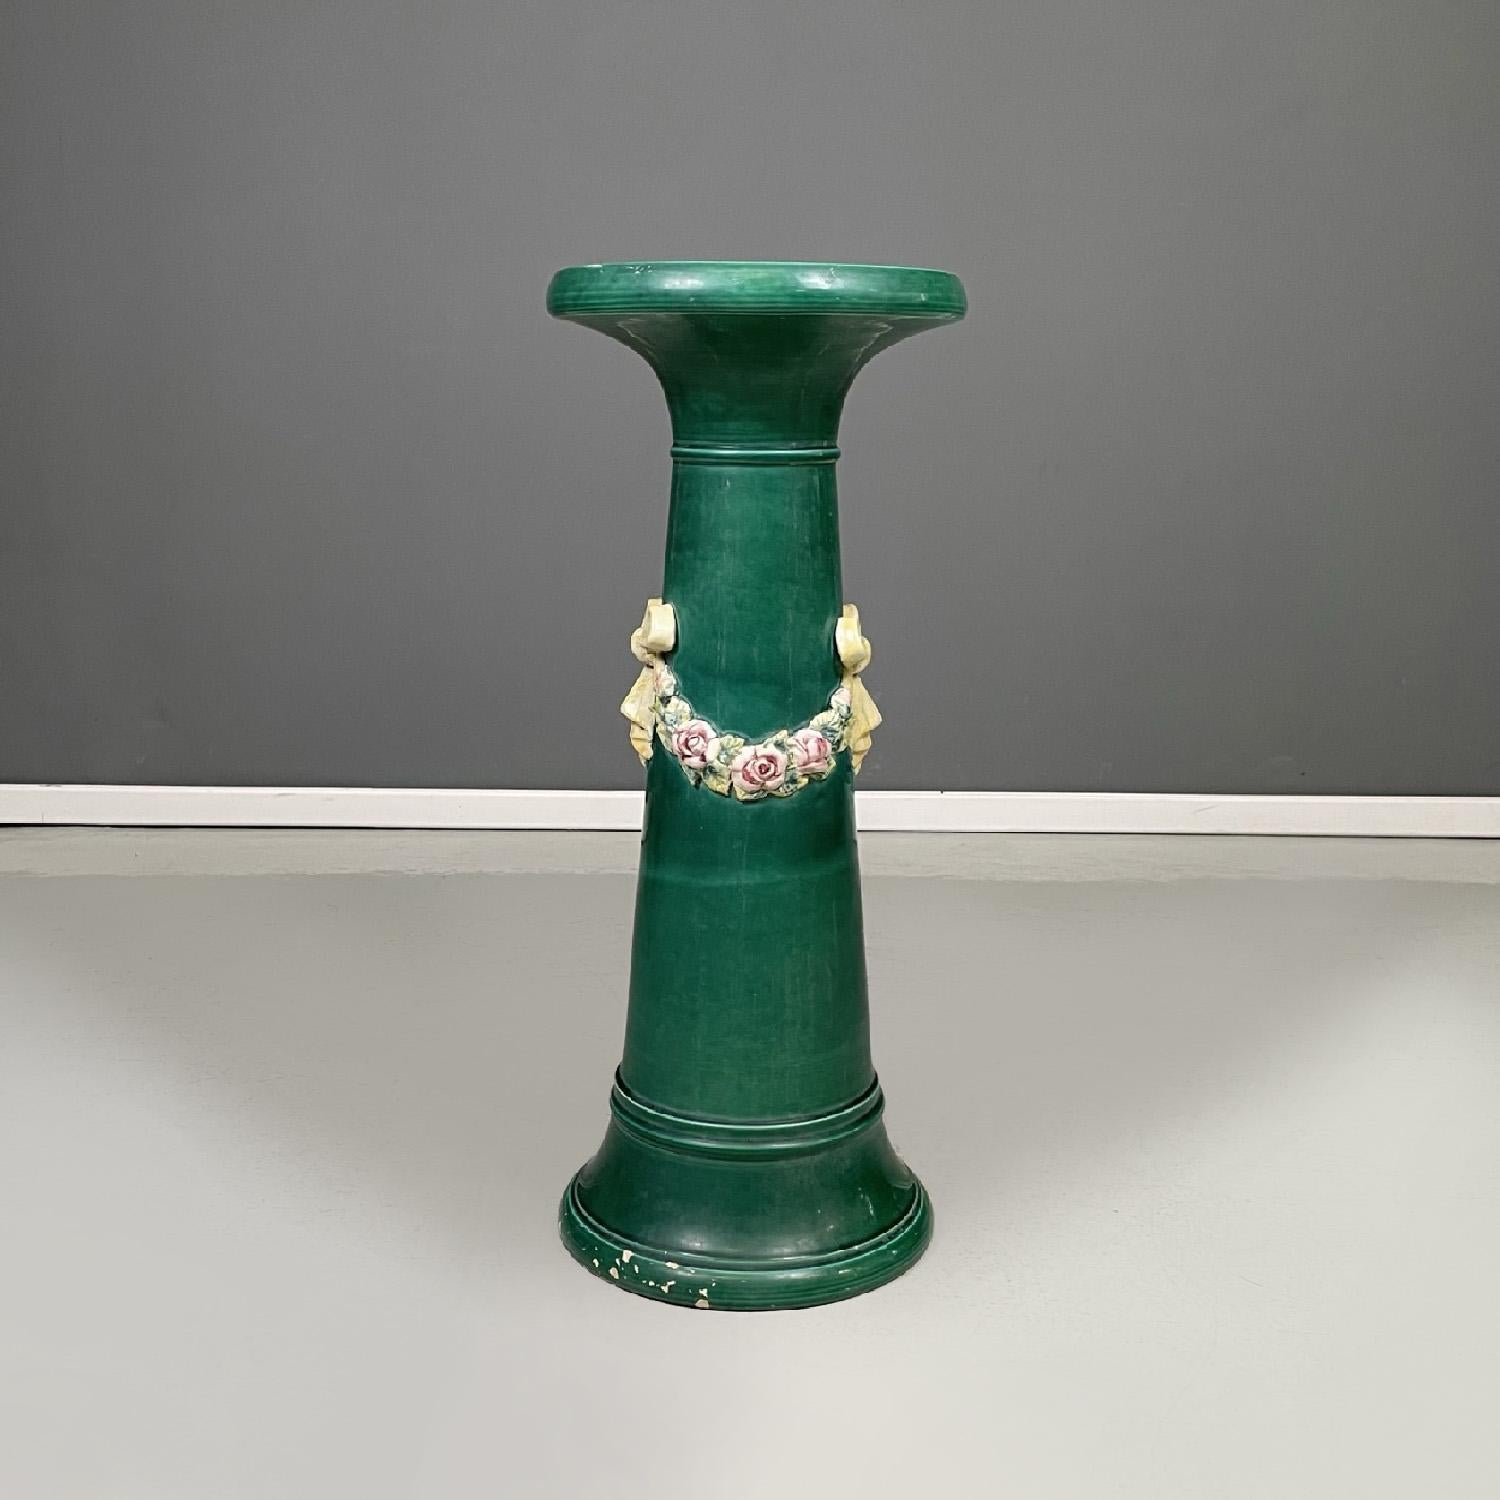 Italian imperial style green ceramic columns pedestals bows and flowers, 1930s In Fair Condition For Sale In MIlano, IT